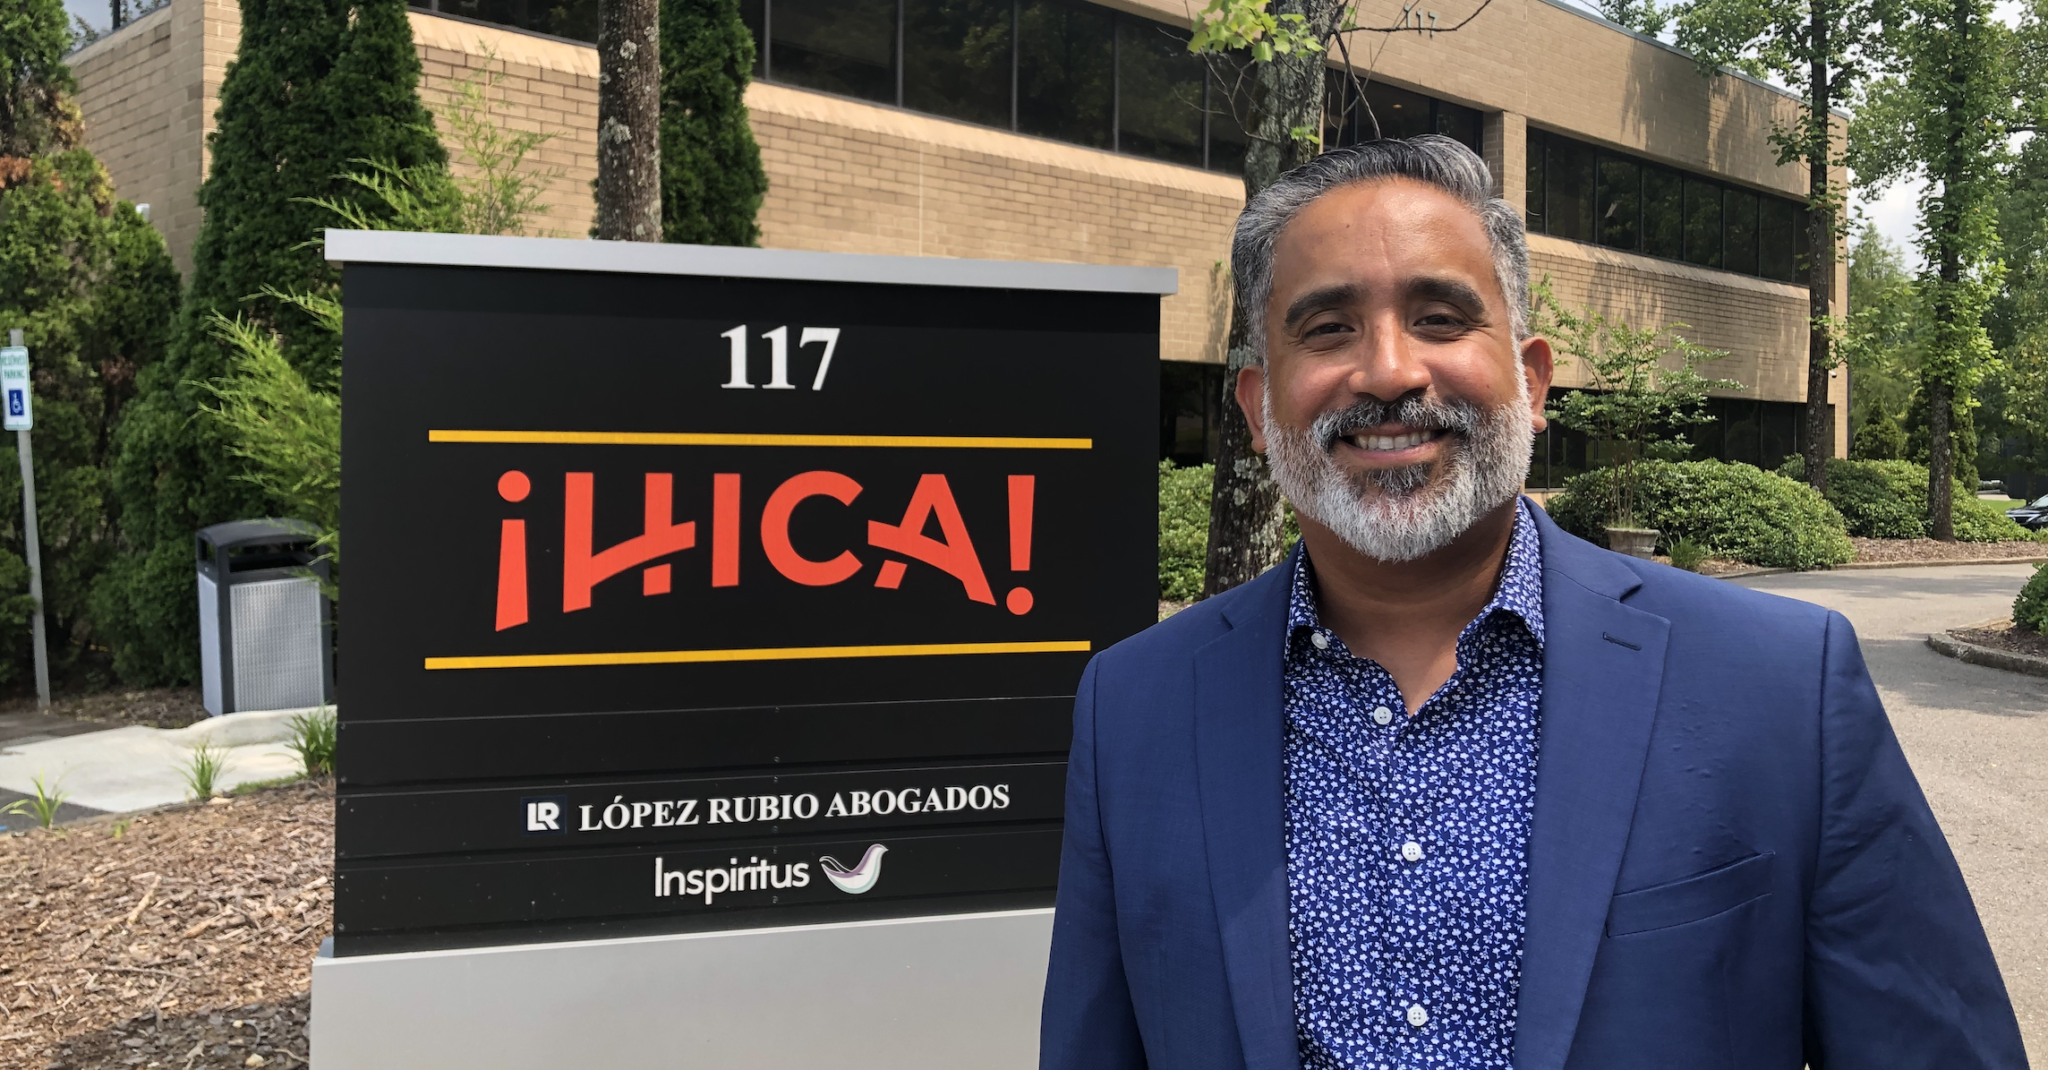 We met up with Carlos Alemán, the incoming CEO of ¡HICA!, who takes the reins in Jan. 2022